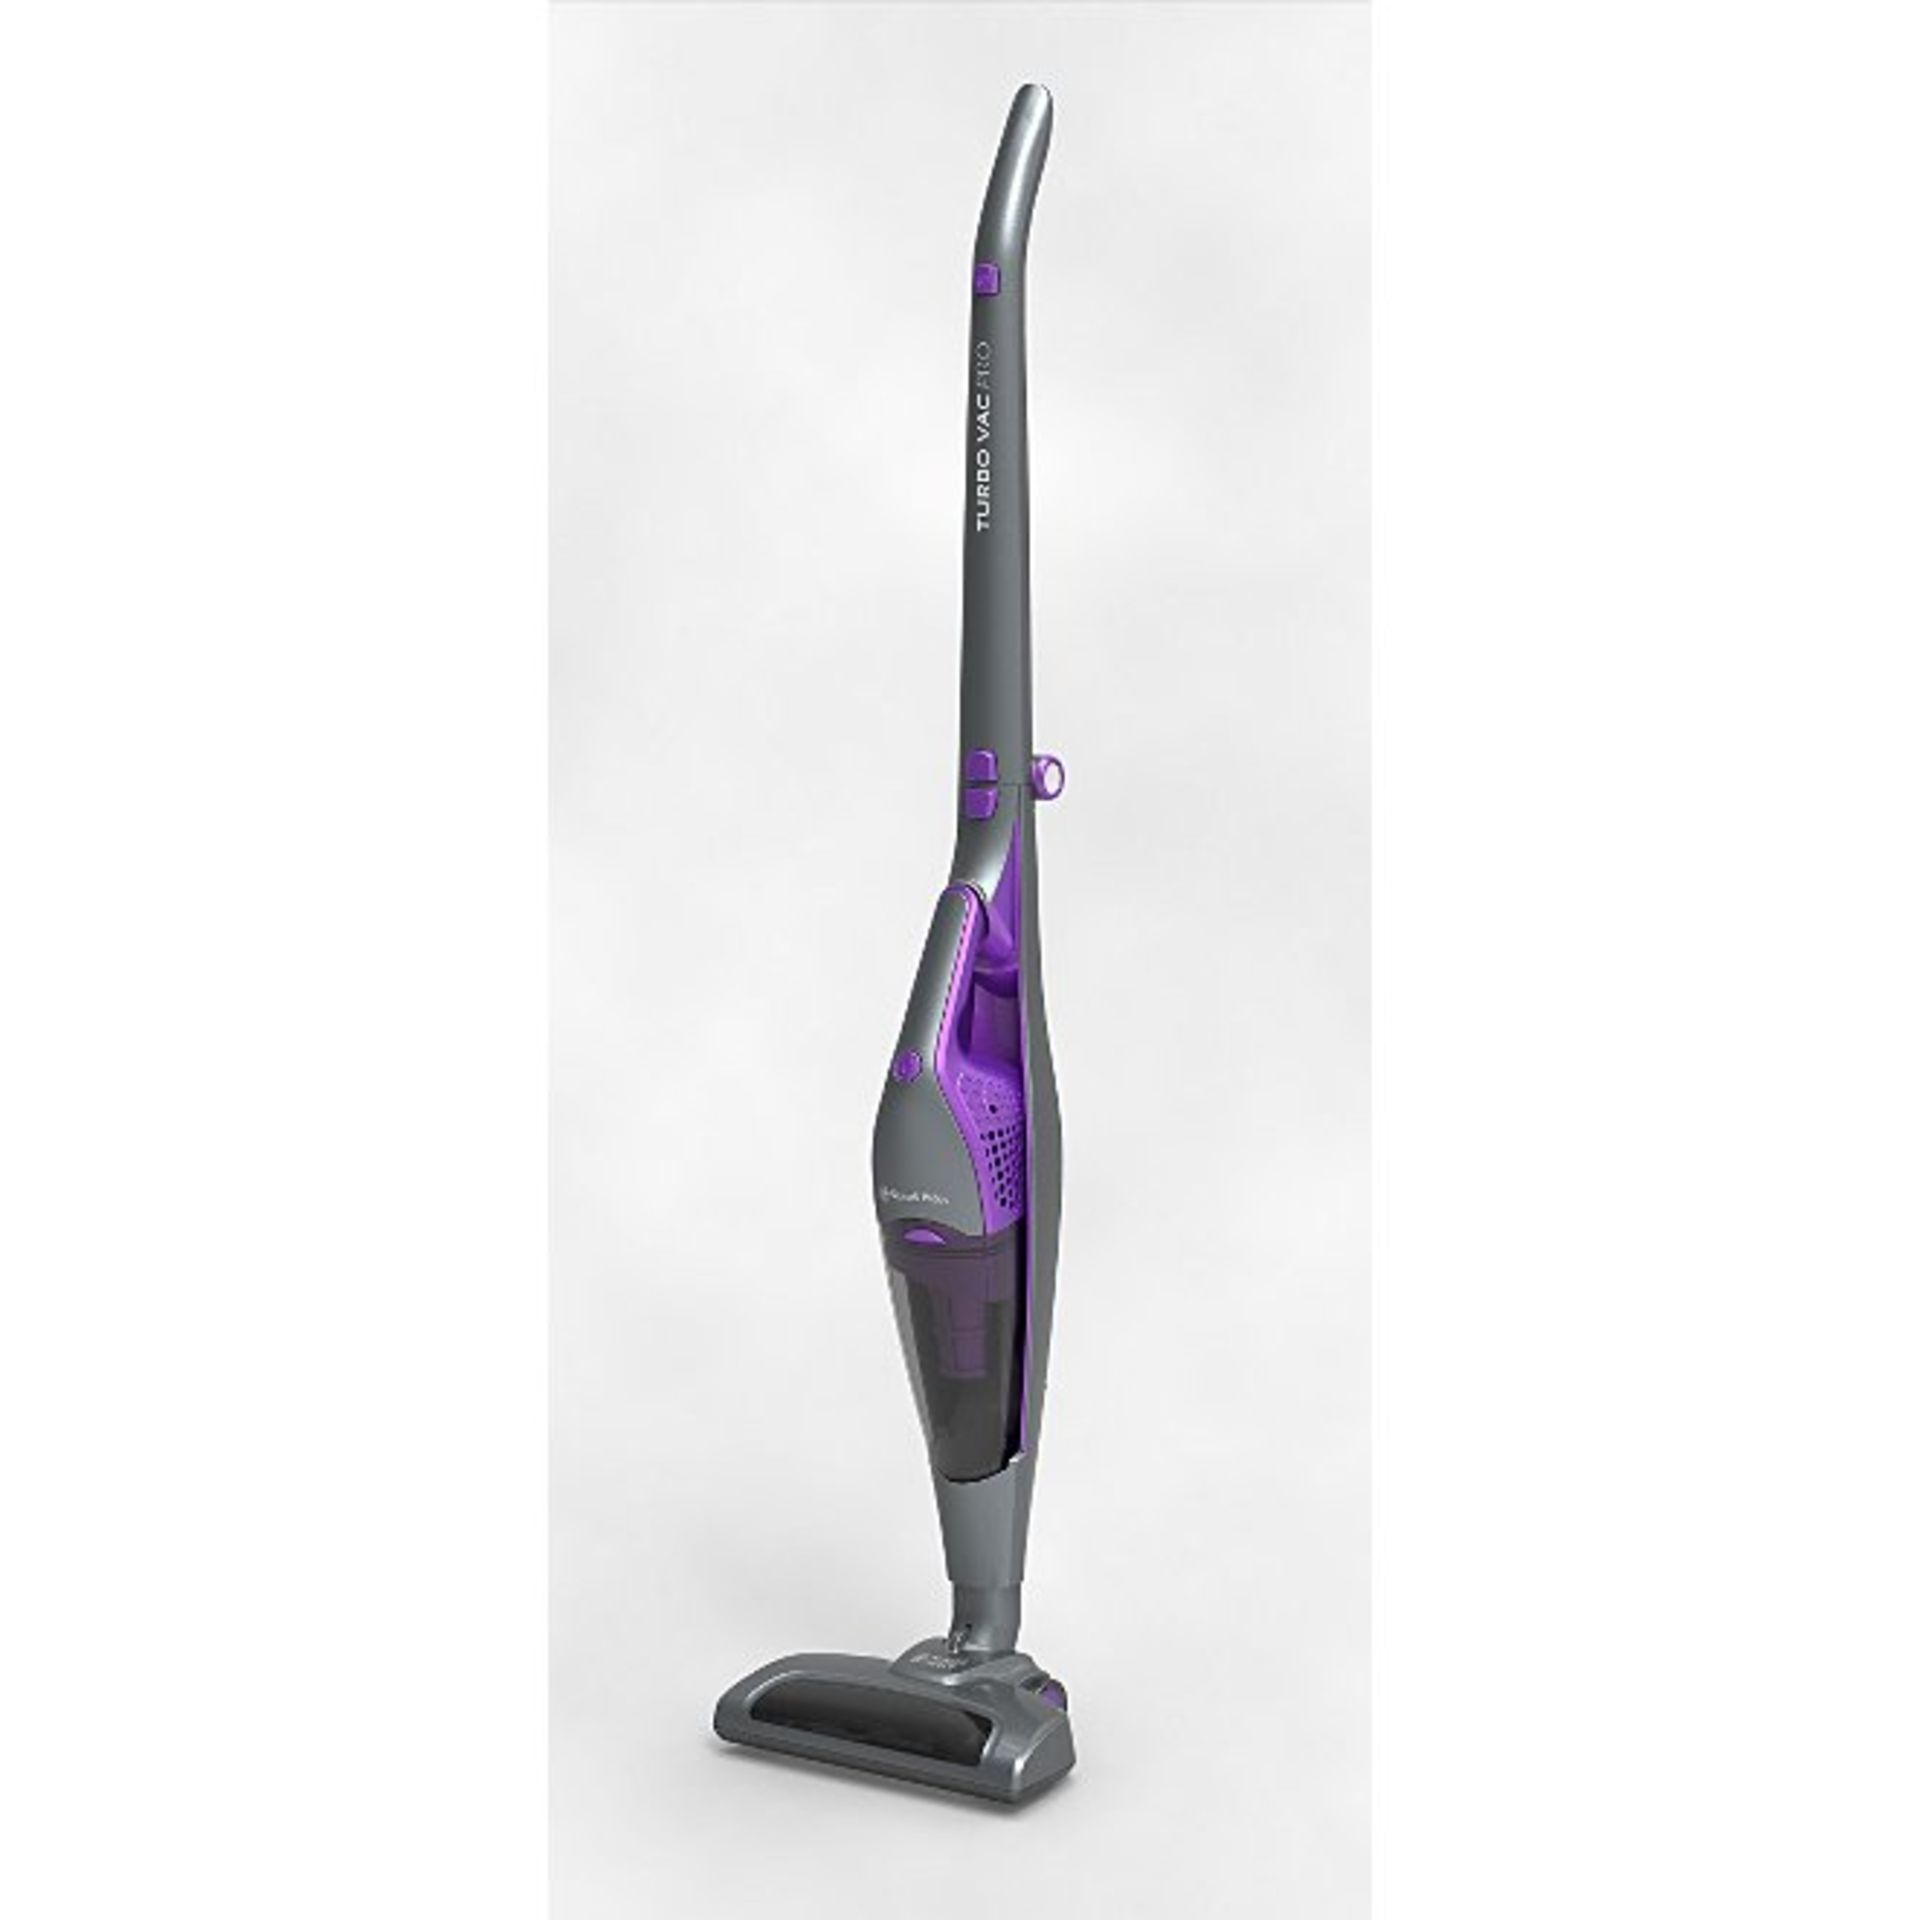 UNBOXED RUSSELL HOBBS TURBO VAC PRO CORDLESS VACUUM CLEANER RRP £110.00Condition ReportAppraisal - Image 2 of 2